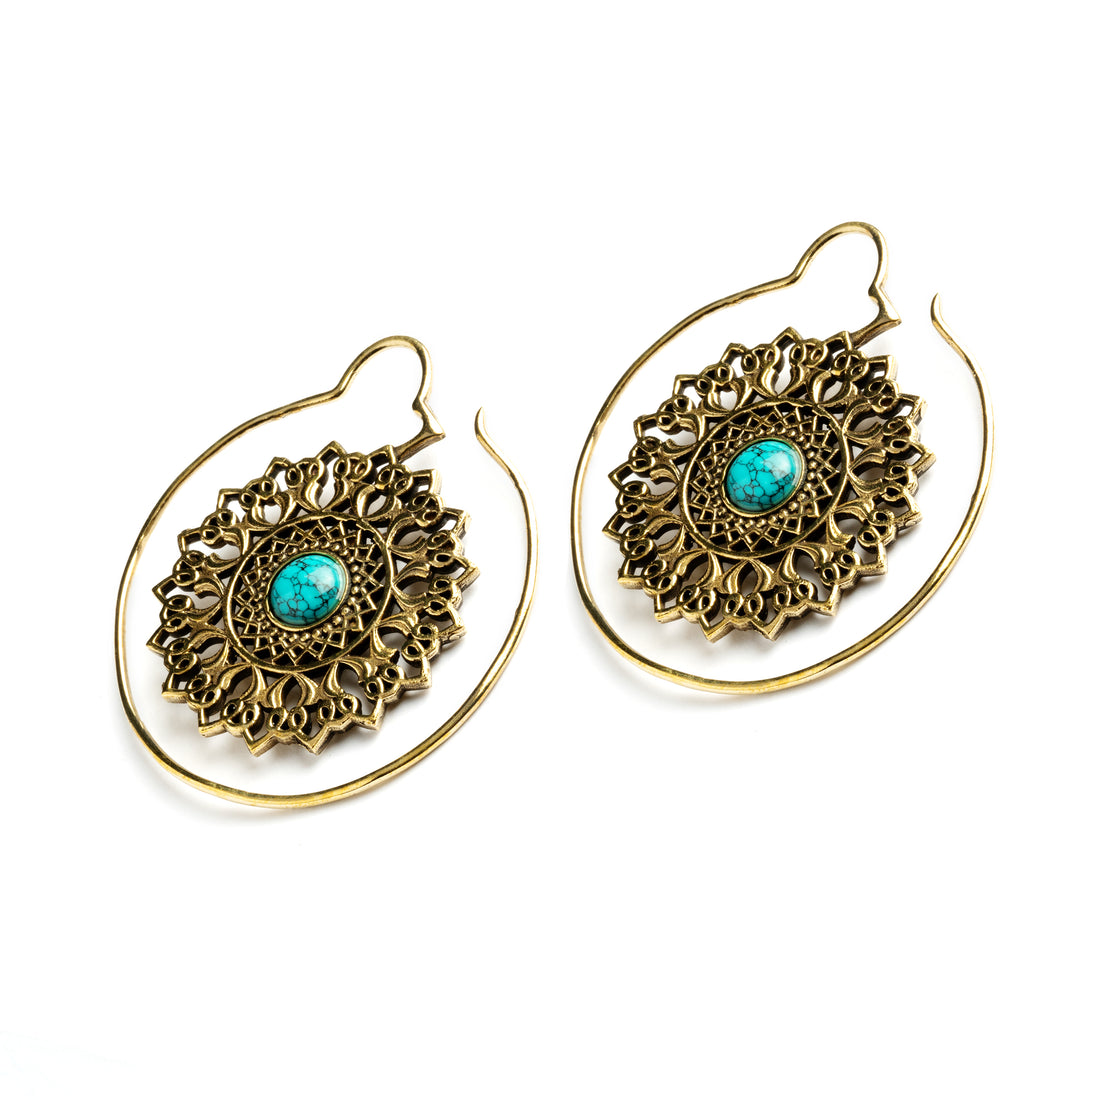 pair of golden brass large flower mandala earrings with centred Turquoise right side view